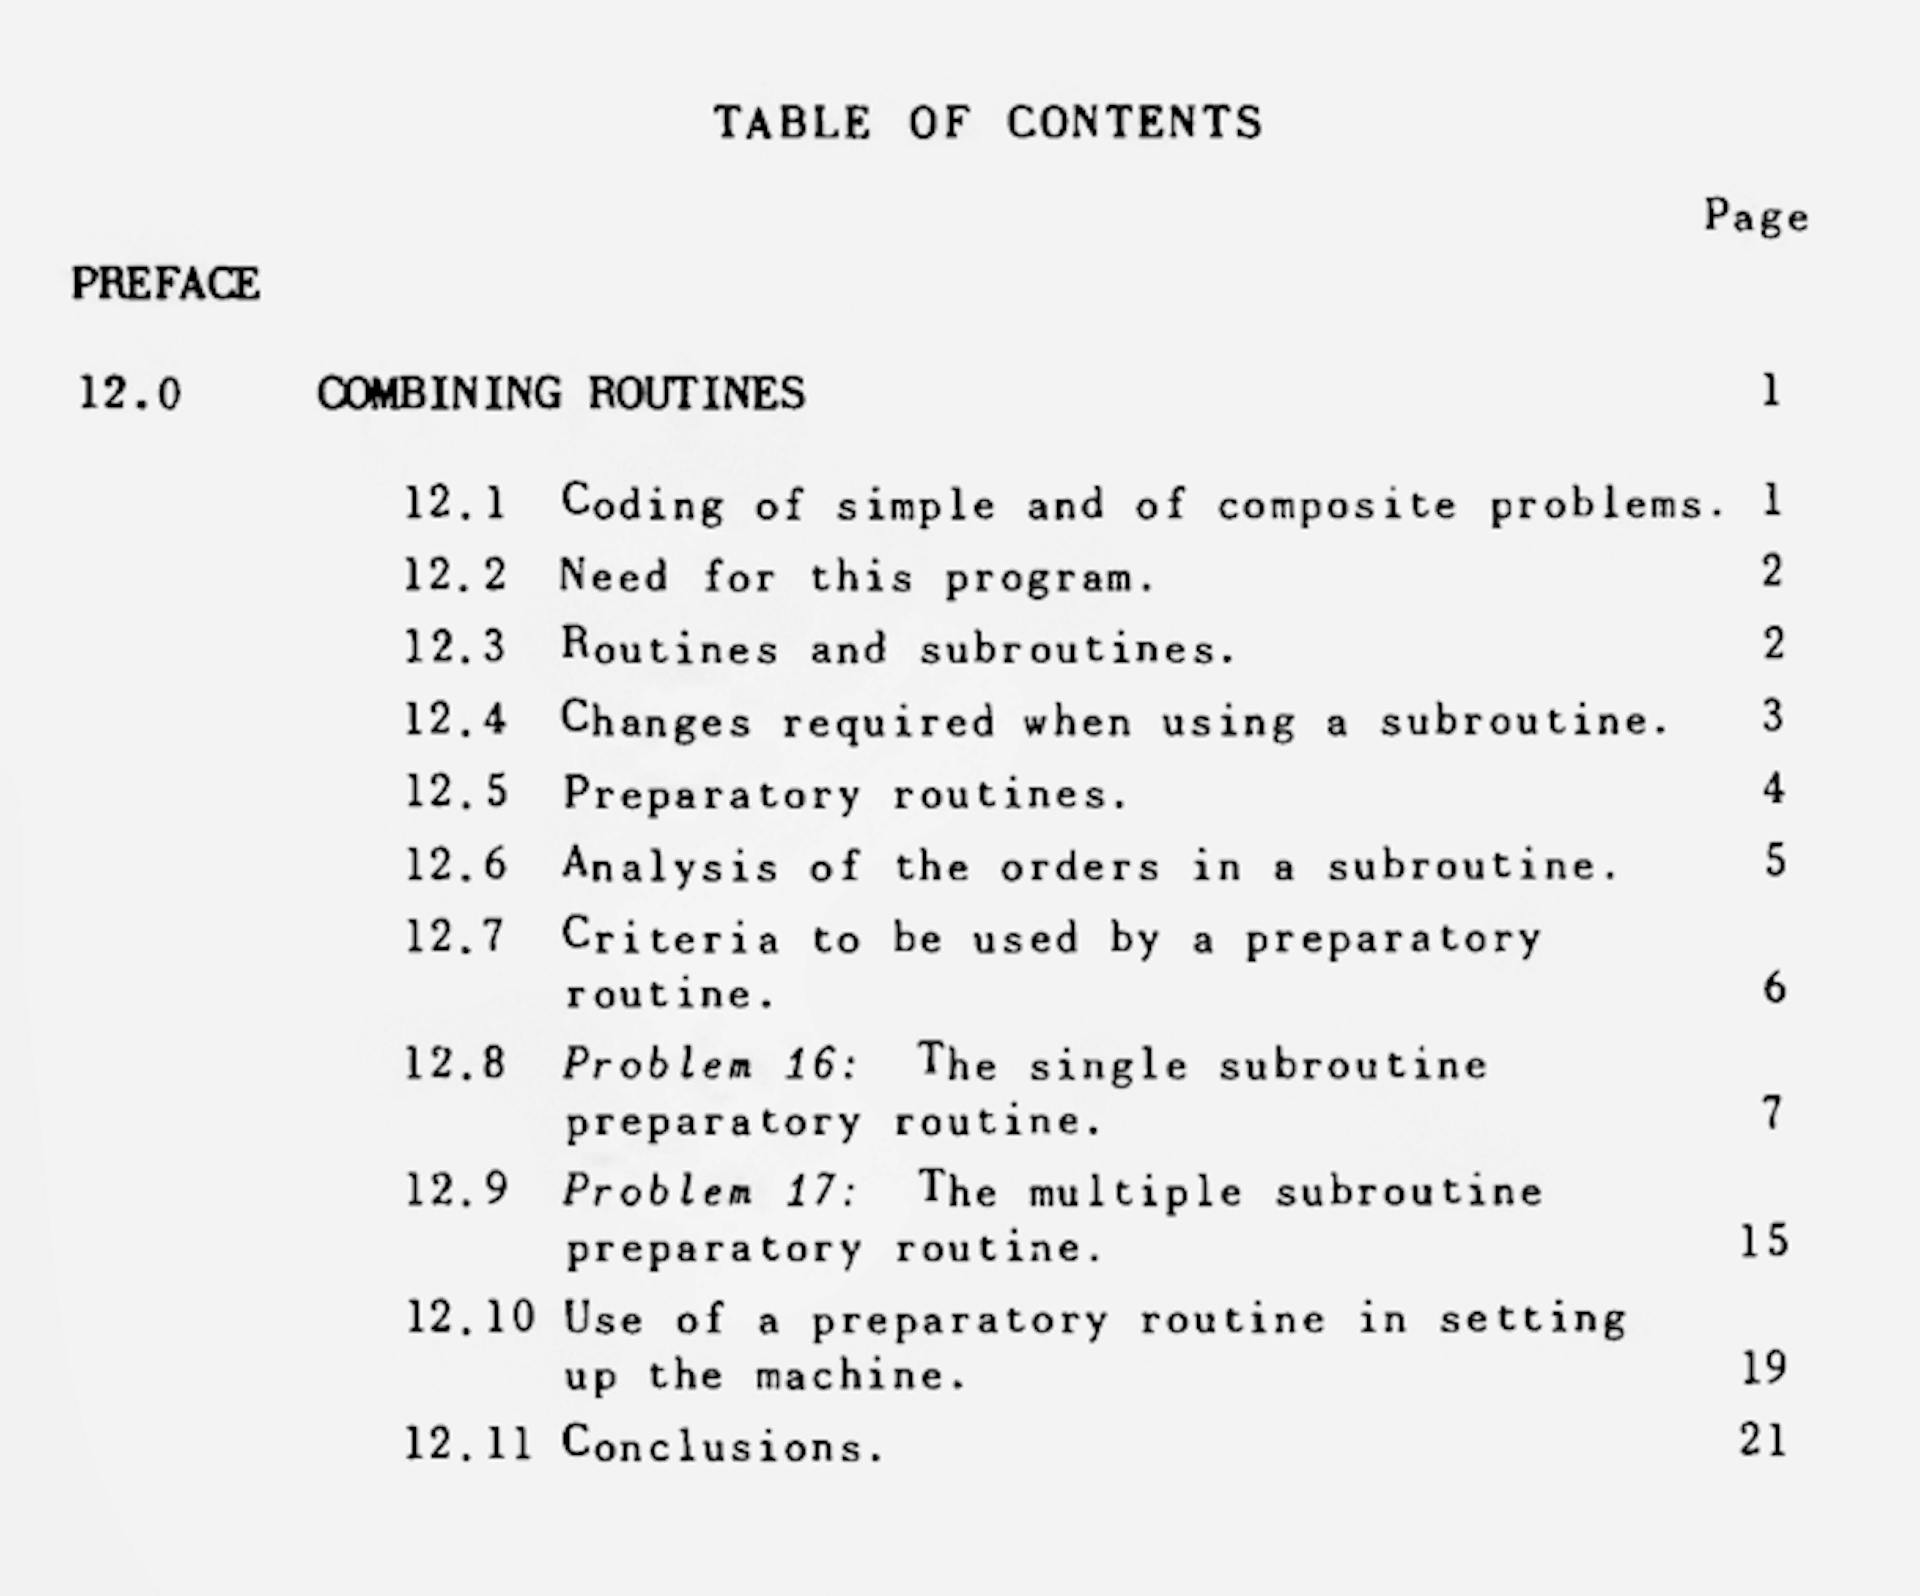 Table of Contents for Planning and Coding of Problems for an Electronic Computing Instrument (Part II, Vol III)